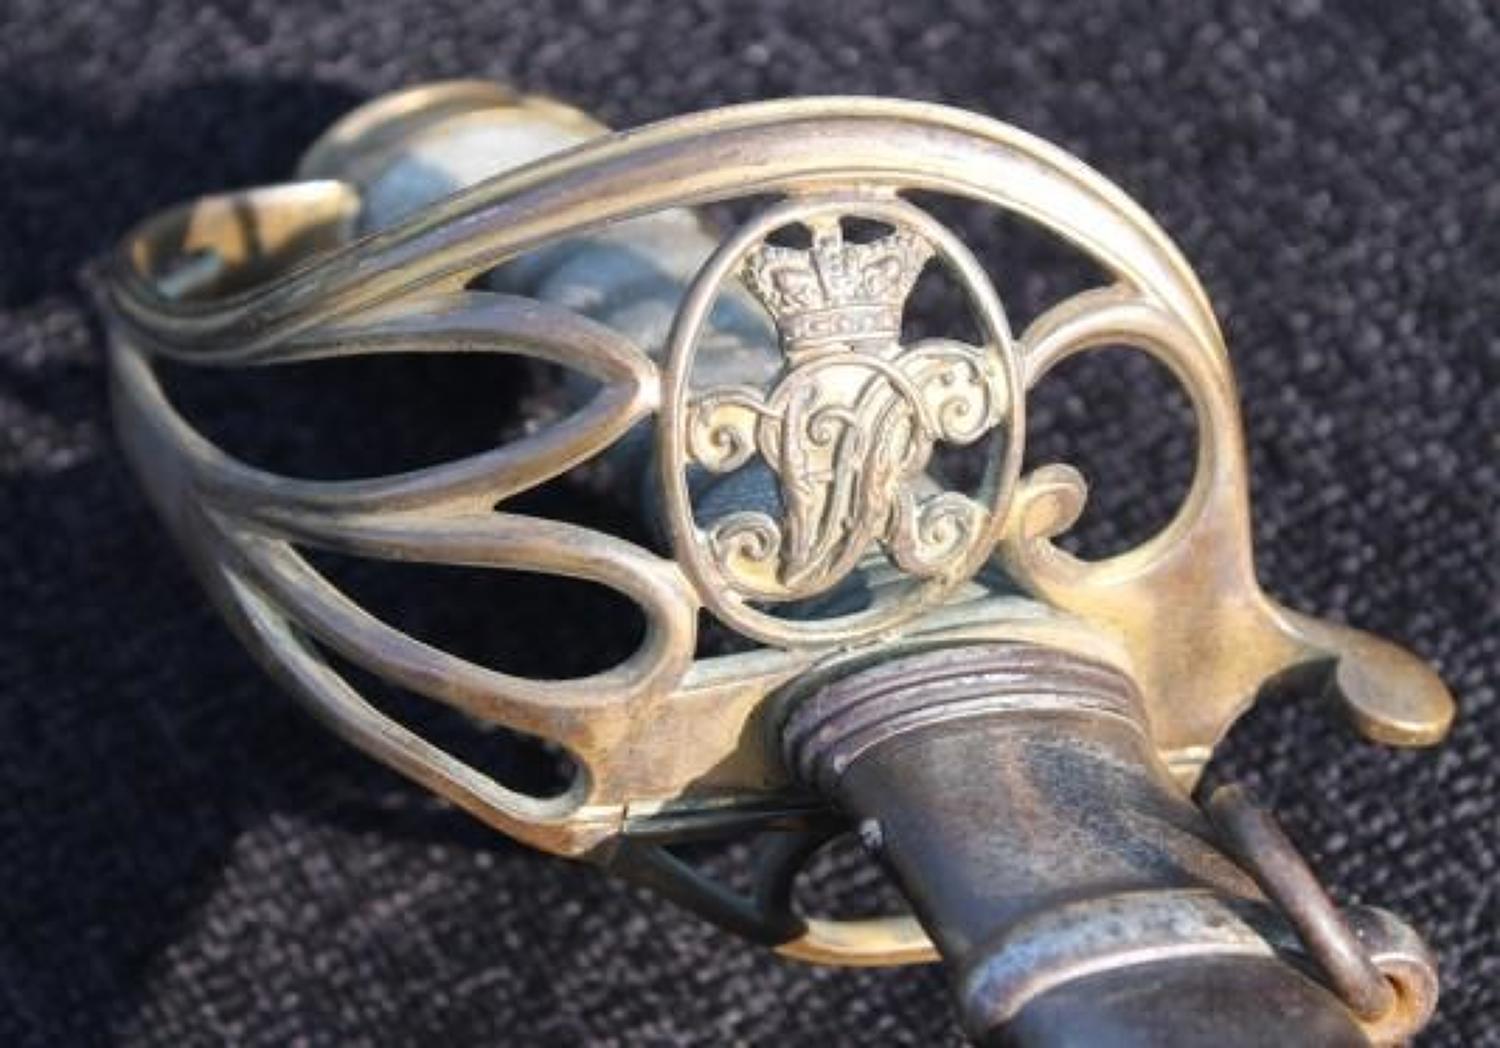 7th Fusiliers Officers Sword